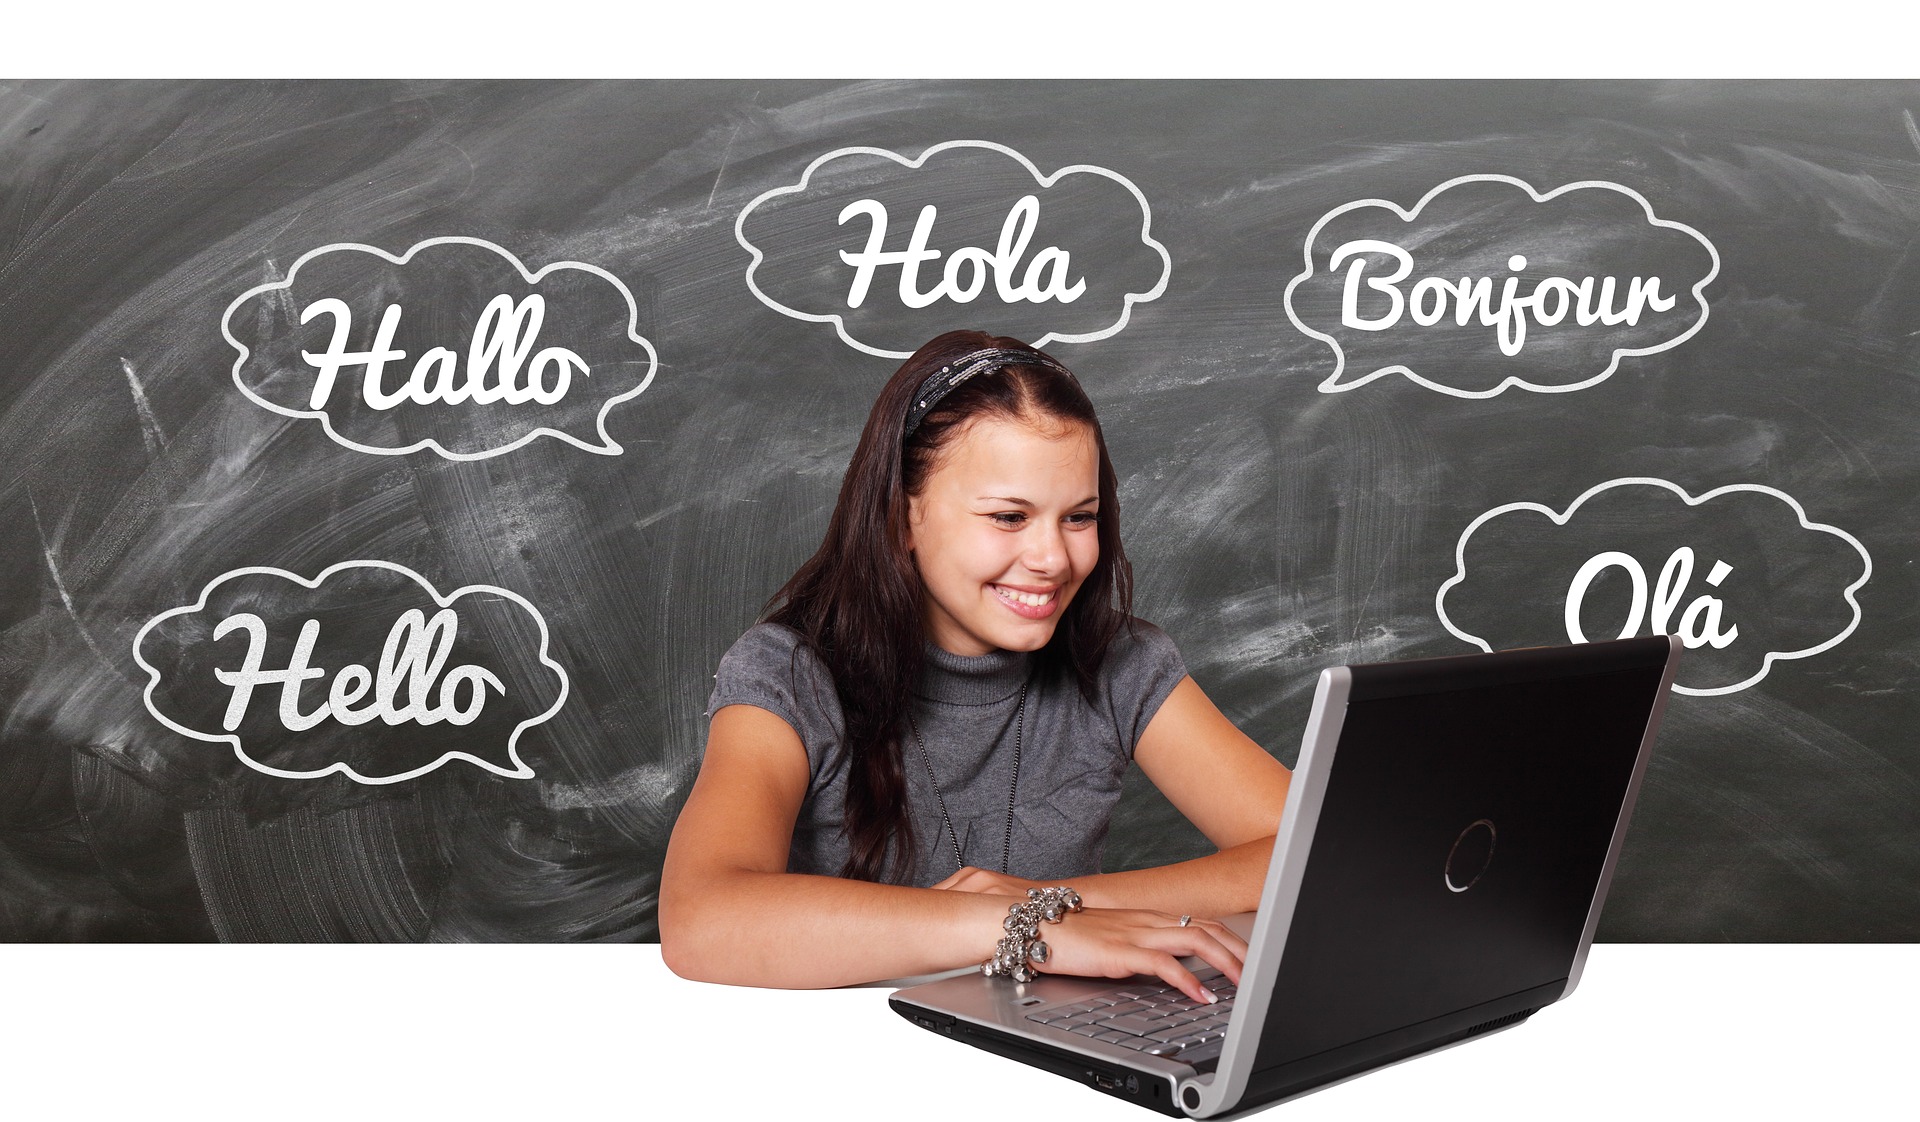 The word Hello written in different languages behind girl with laptop